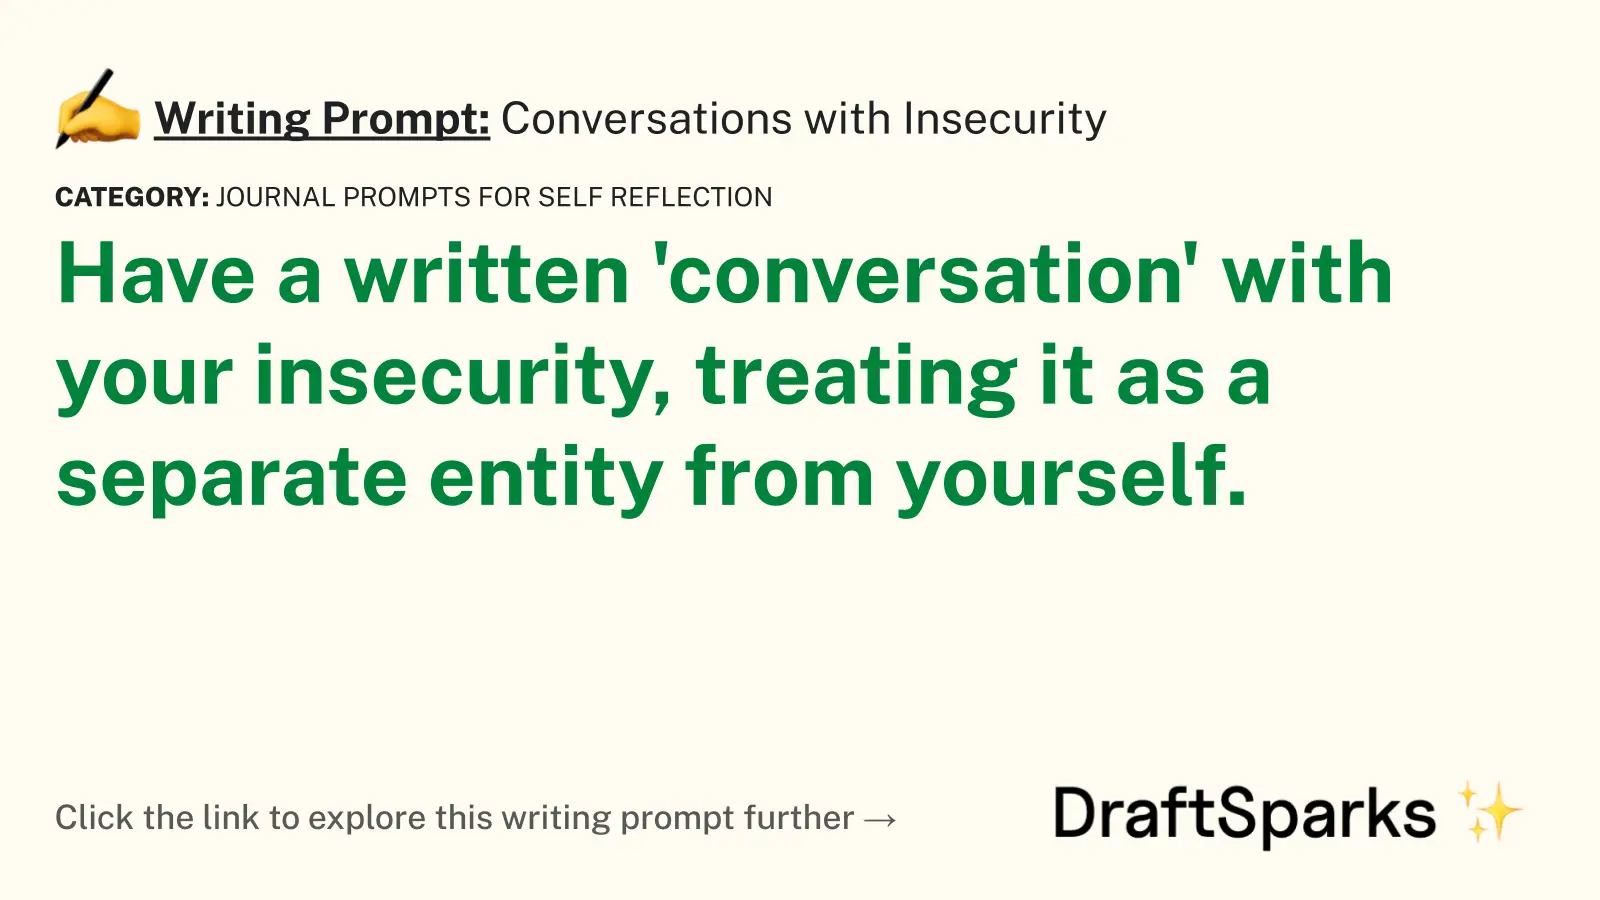 Conversations with Insecurity